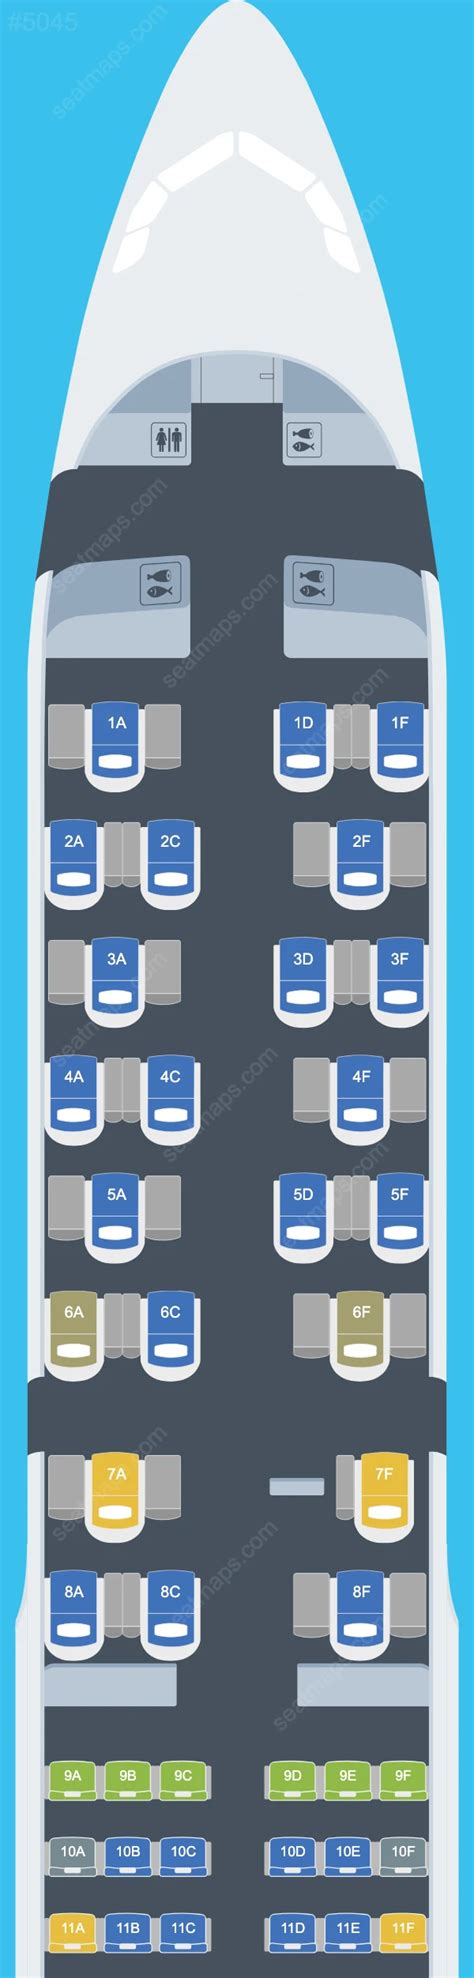 Seat Map Of British Airways Airbus A321 Aircraft